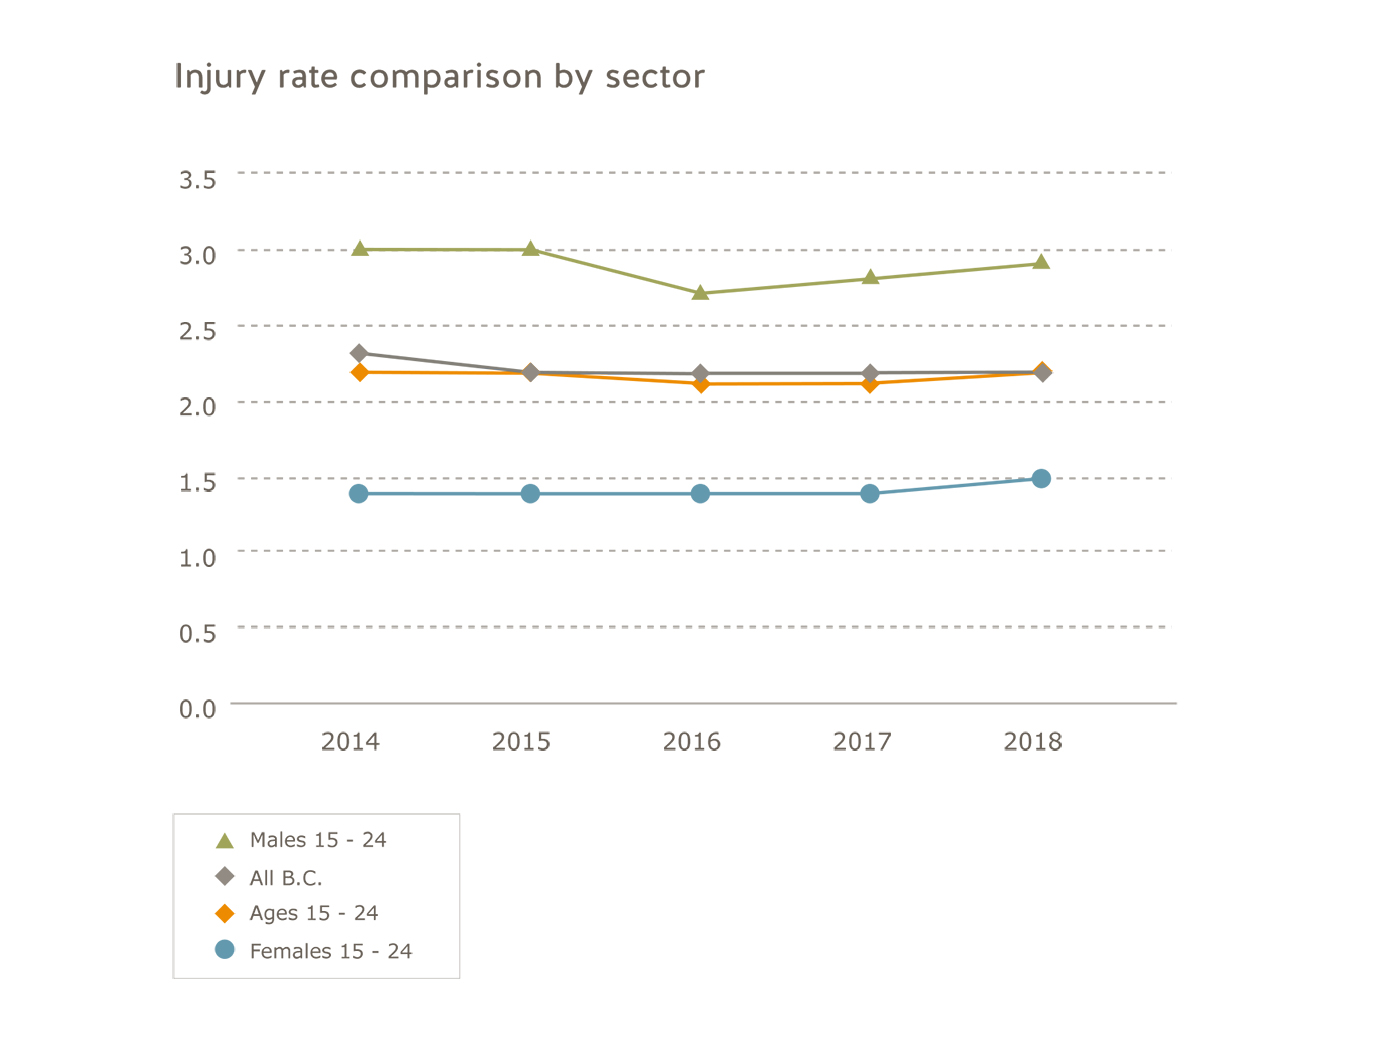 Young and new workers injury rate comparison by sector for 2014 to 2018.